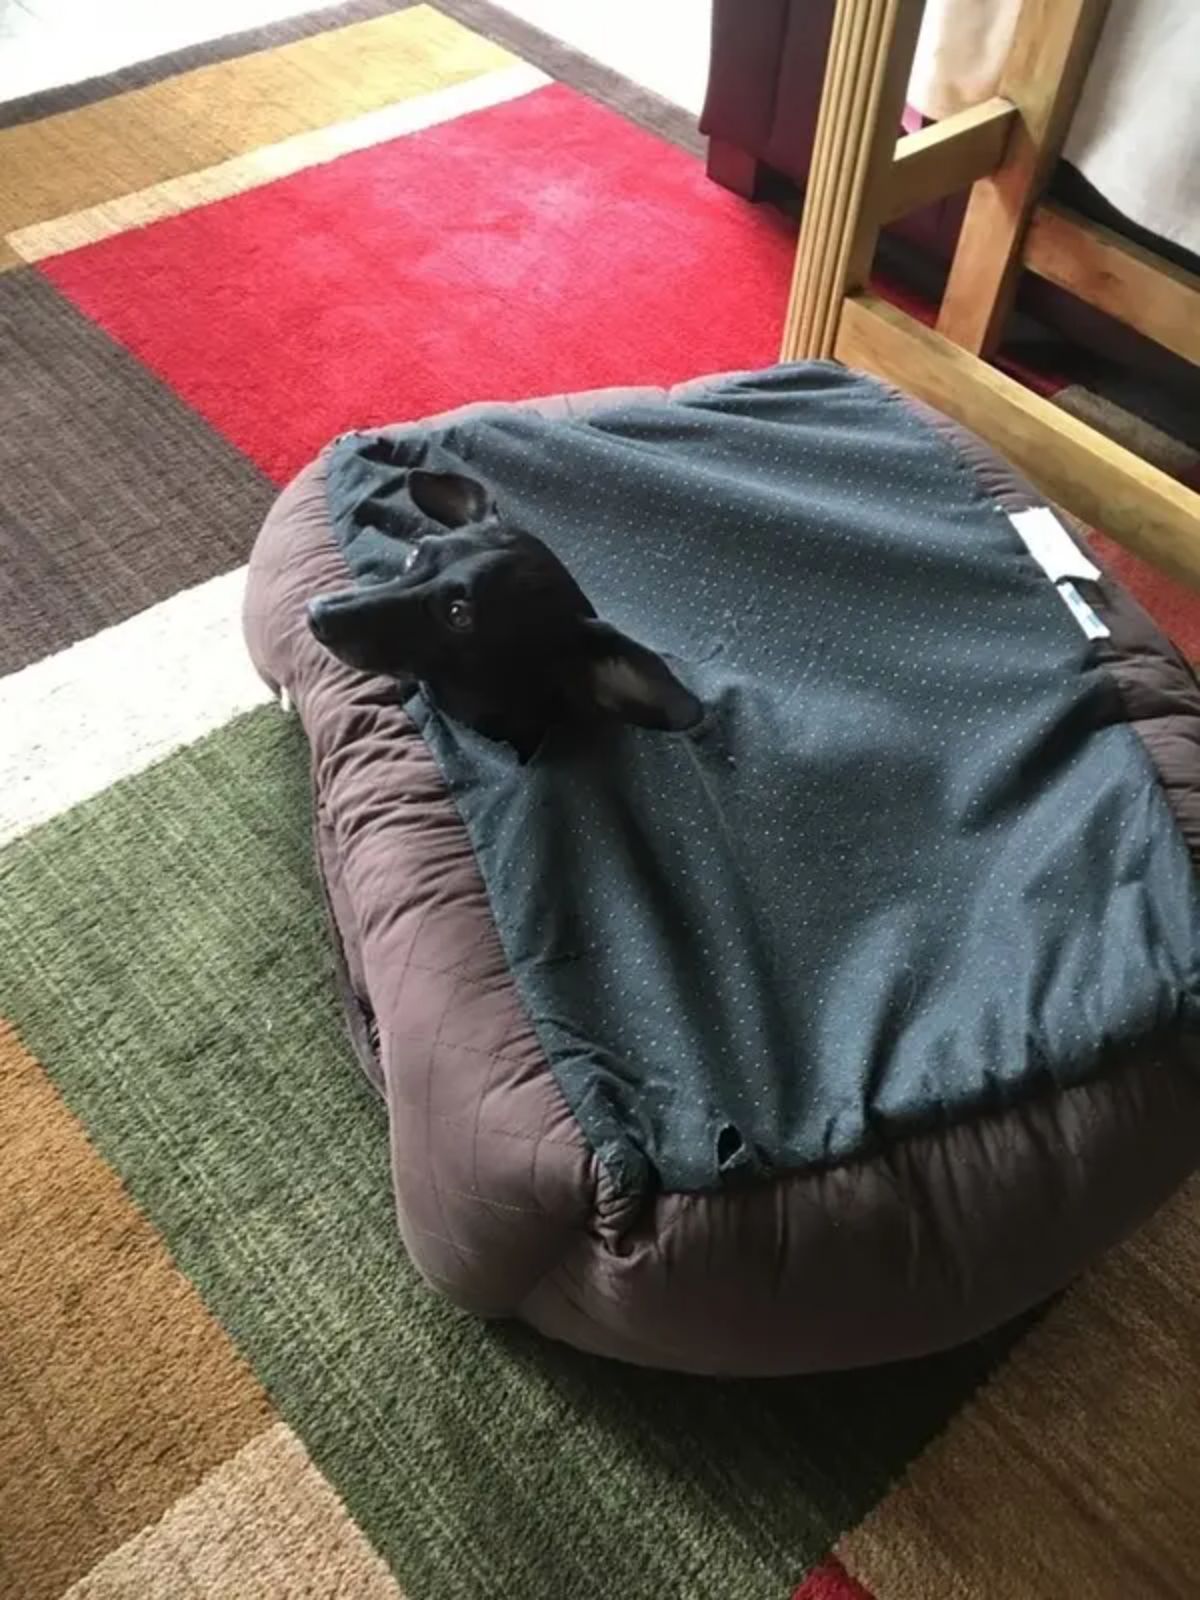 black dog's head appearing from inside the bottom of a torn-up brown and green dog bed